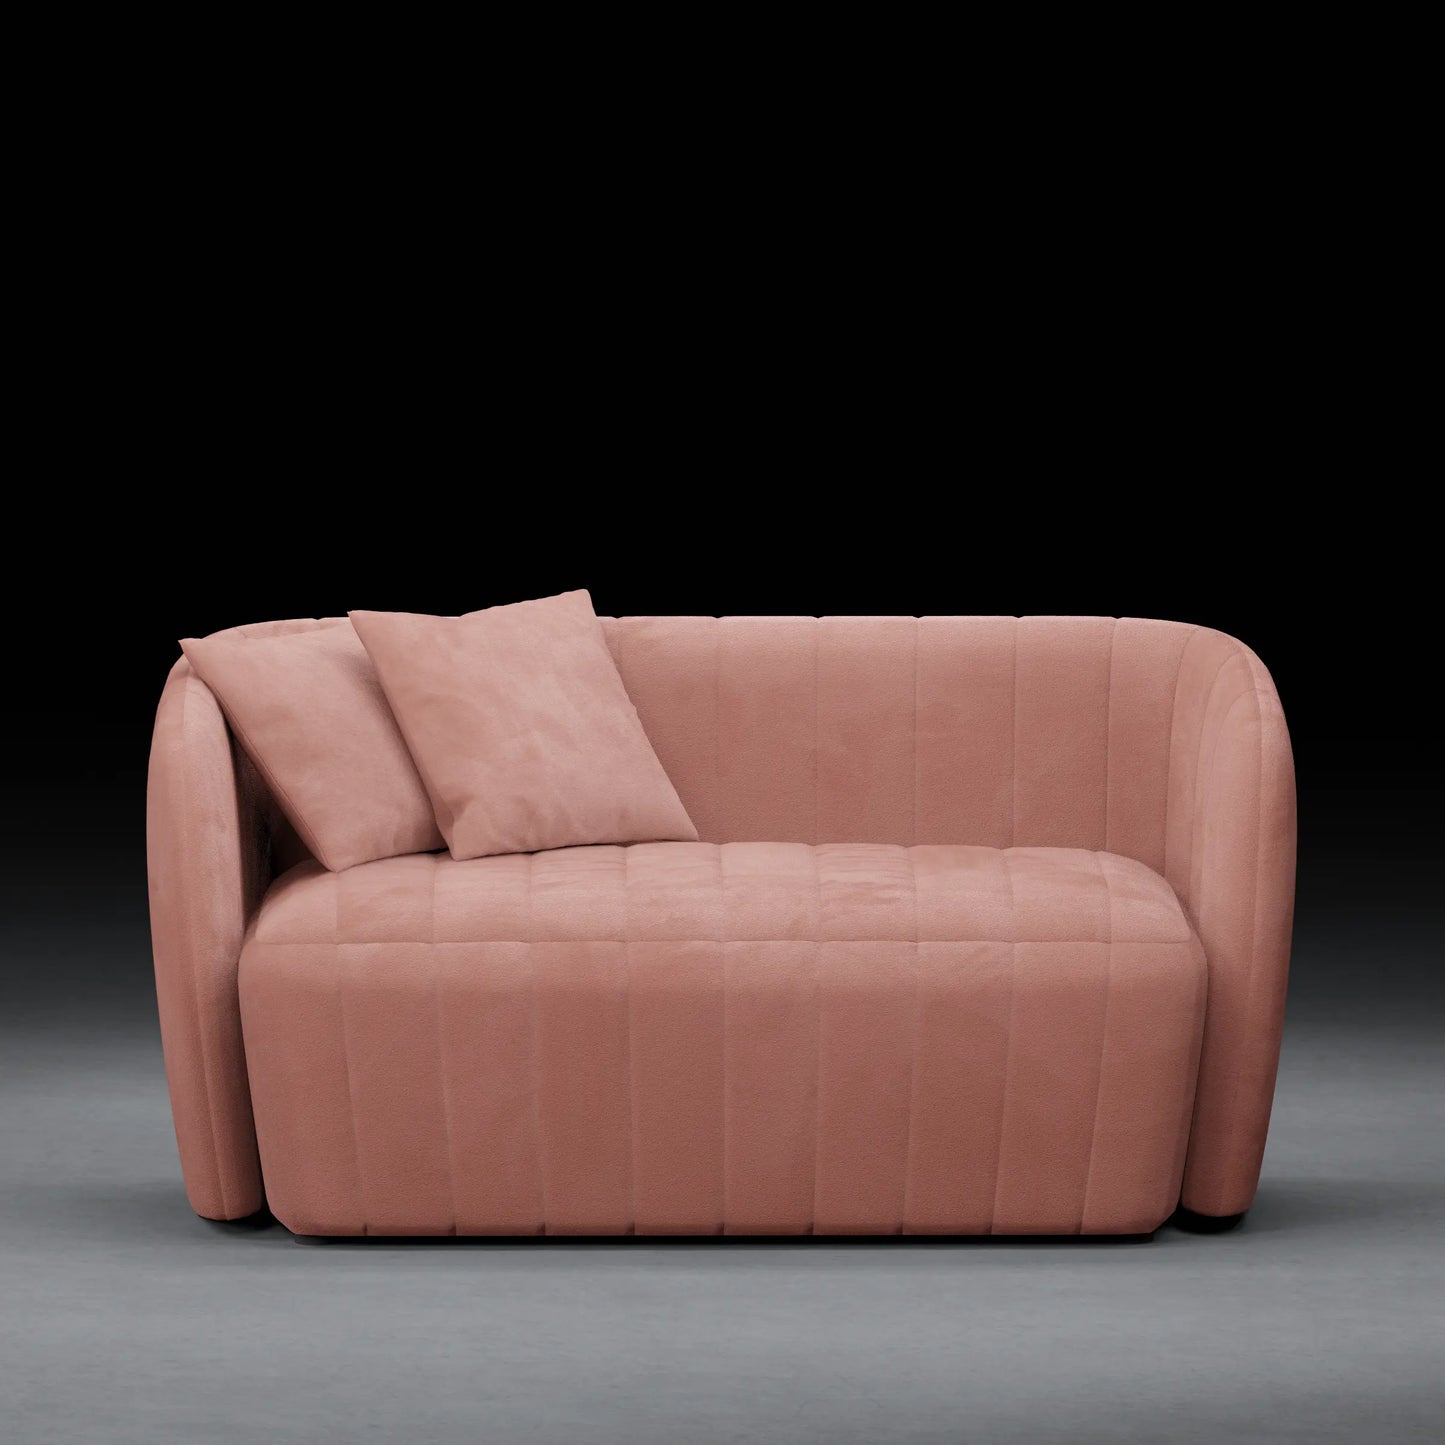 DAFFODIL - 2 Seater Tuxedo Couch In Velvet Finish | Pink Color